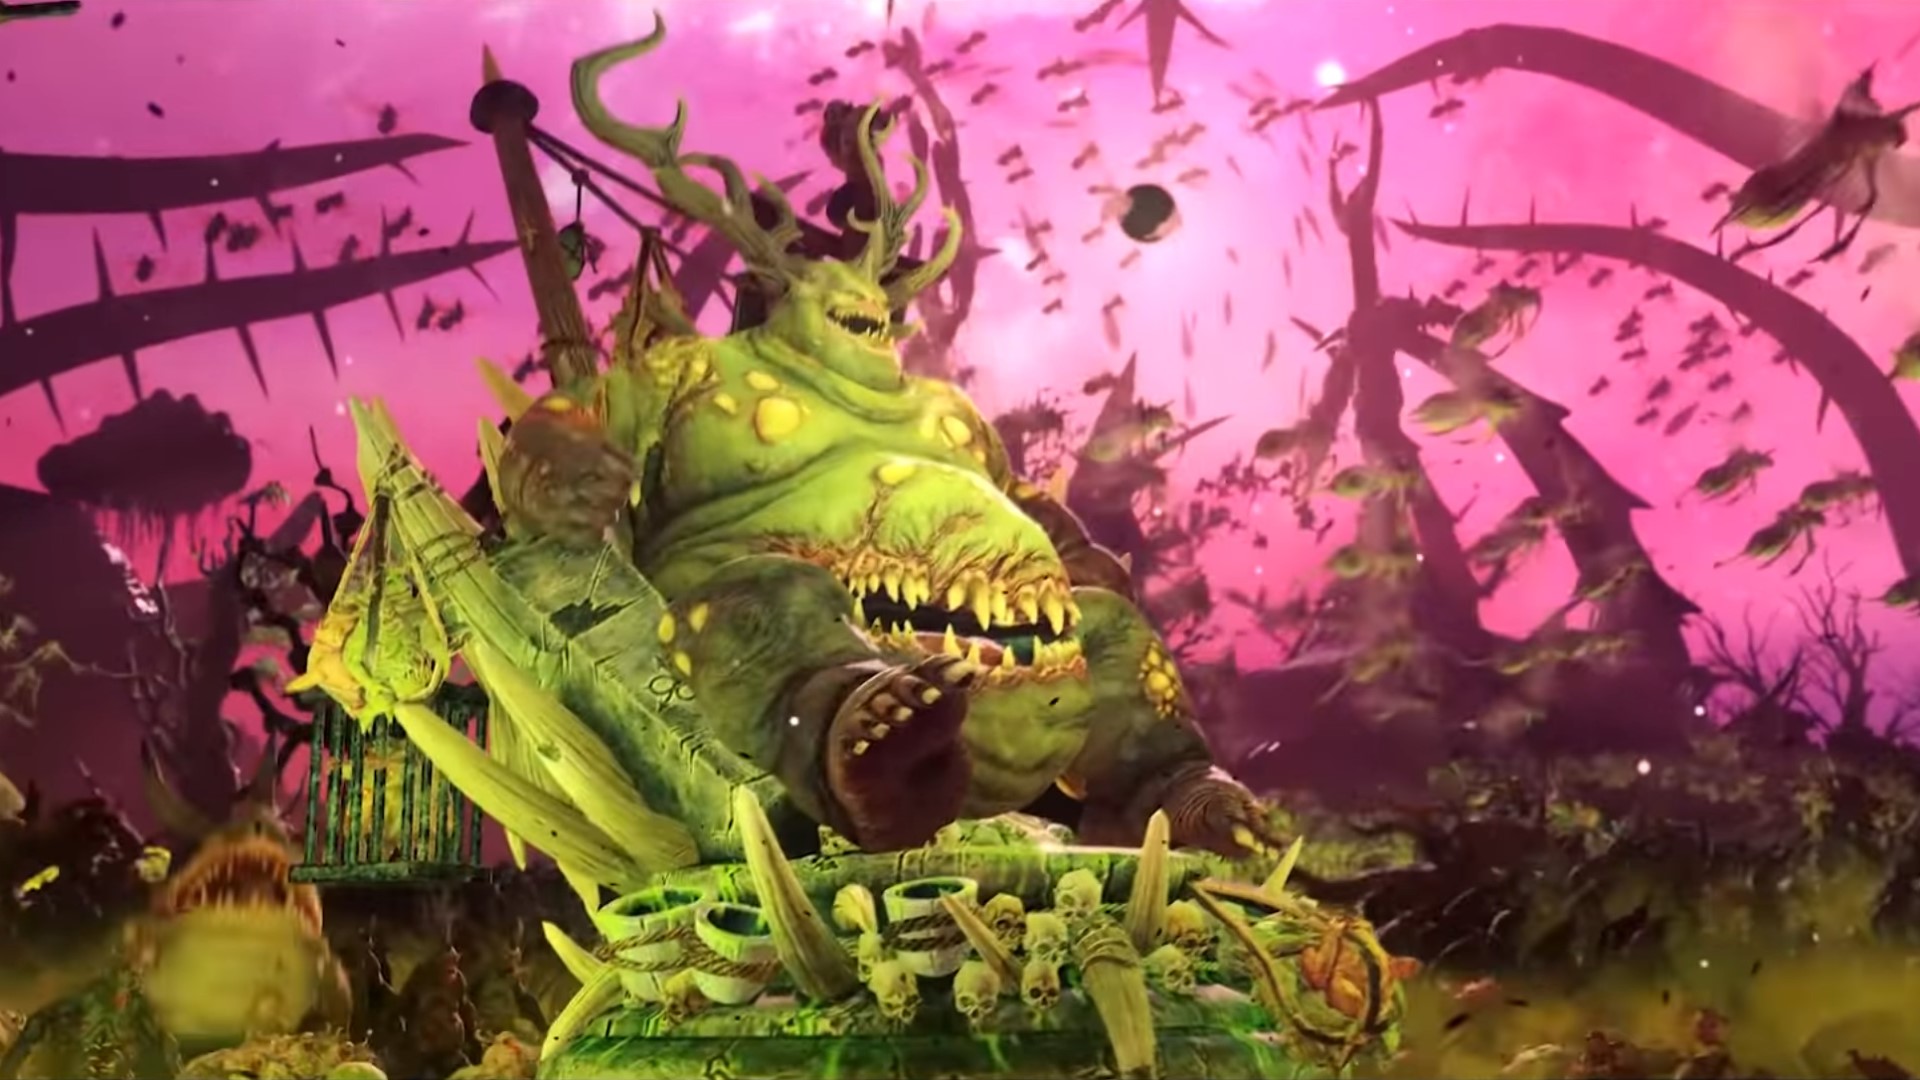 Yes, Total Warhammer 3's Nurgle units are all extremely gross